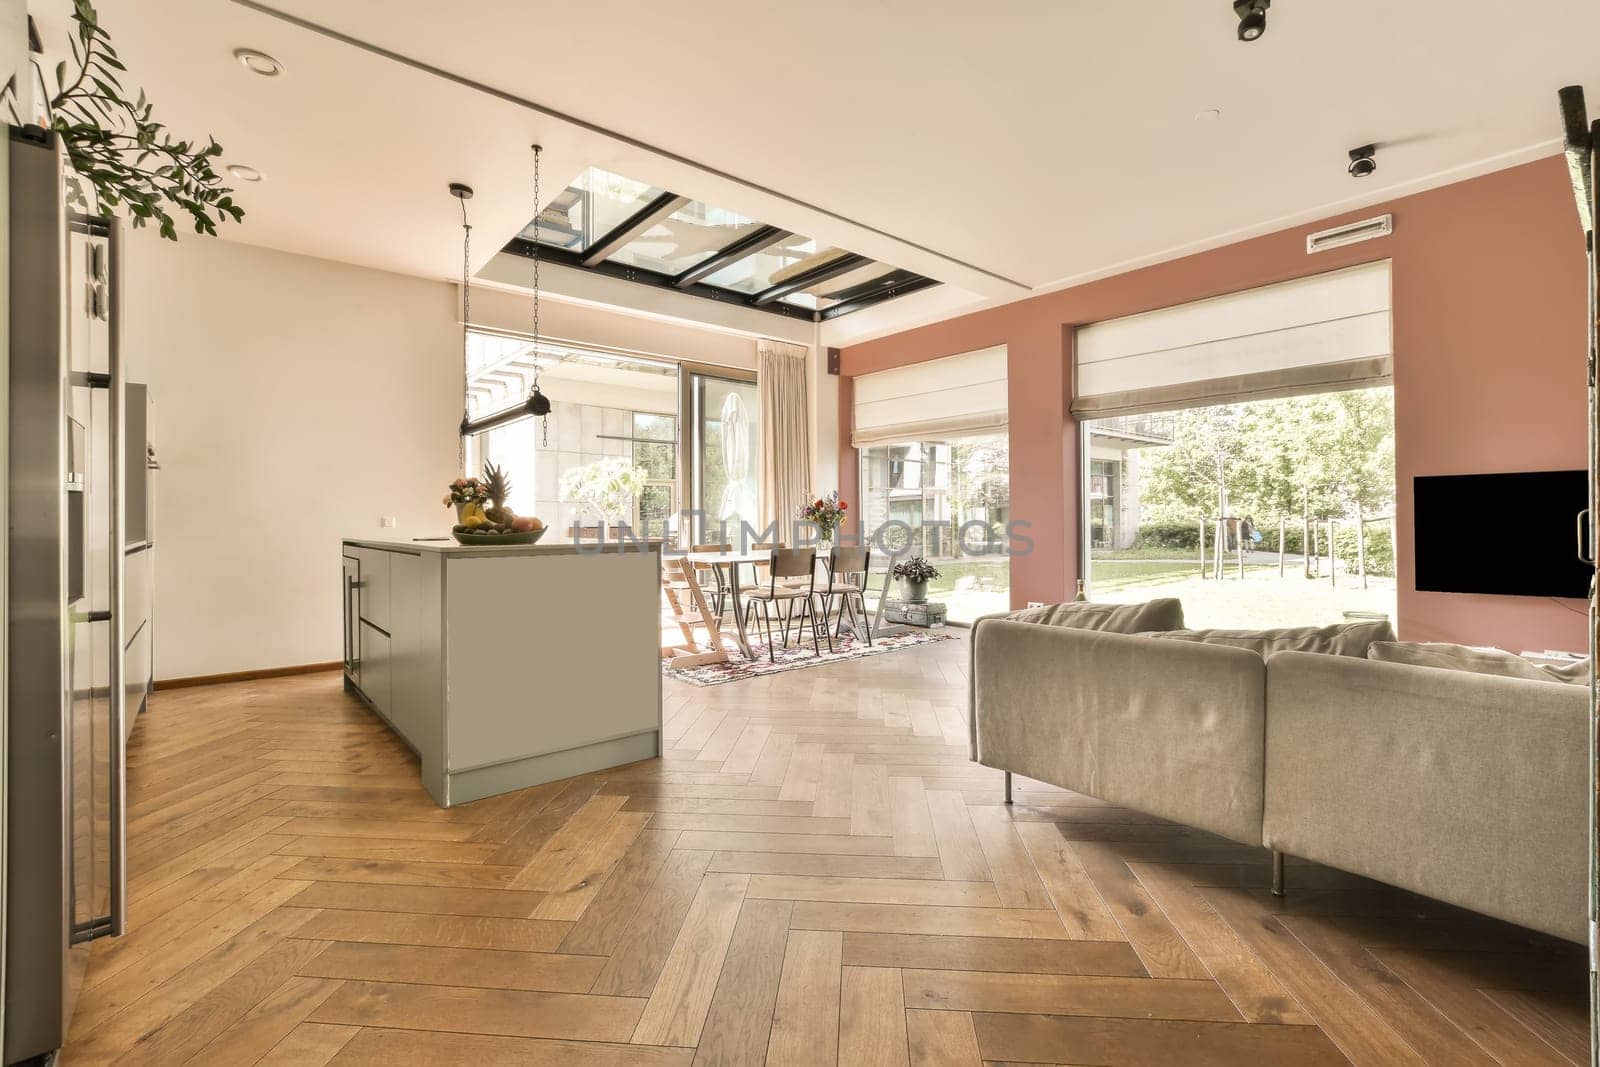 a living room with wood flooring and an open door leading to the kitchen area in the room is bright pink